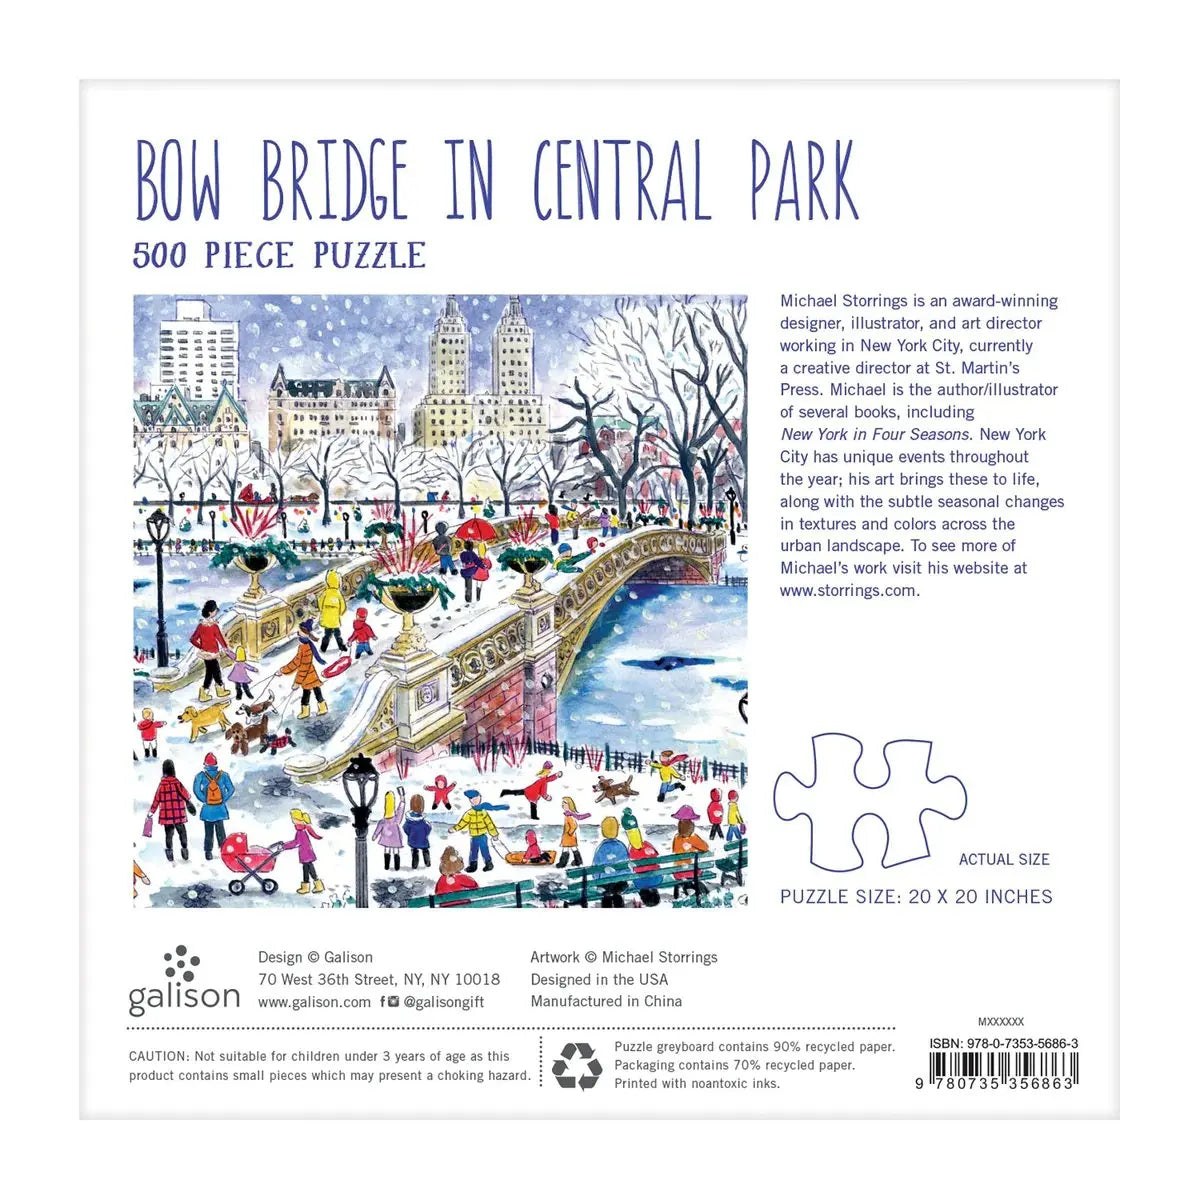 Bow Bridge in Central Park 500 piece puzzle Michael Storring is an award-winning designer, illustrator, and art director working in New York City, currently a creative director at Saint Martin's Press. Michael is the auther illustrator of several books, including new york in four seasons. New York city has unique events throughout the year he art brings these to life along with the subtle seasonal changes in textures and colors across the urban landscape. To see more of Michael's work visit his website at w